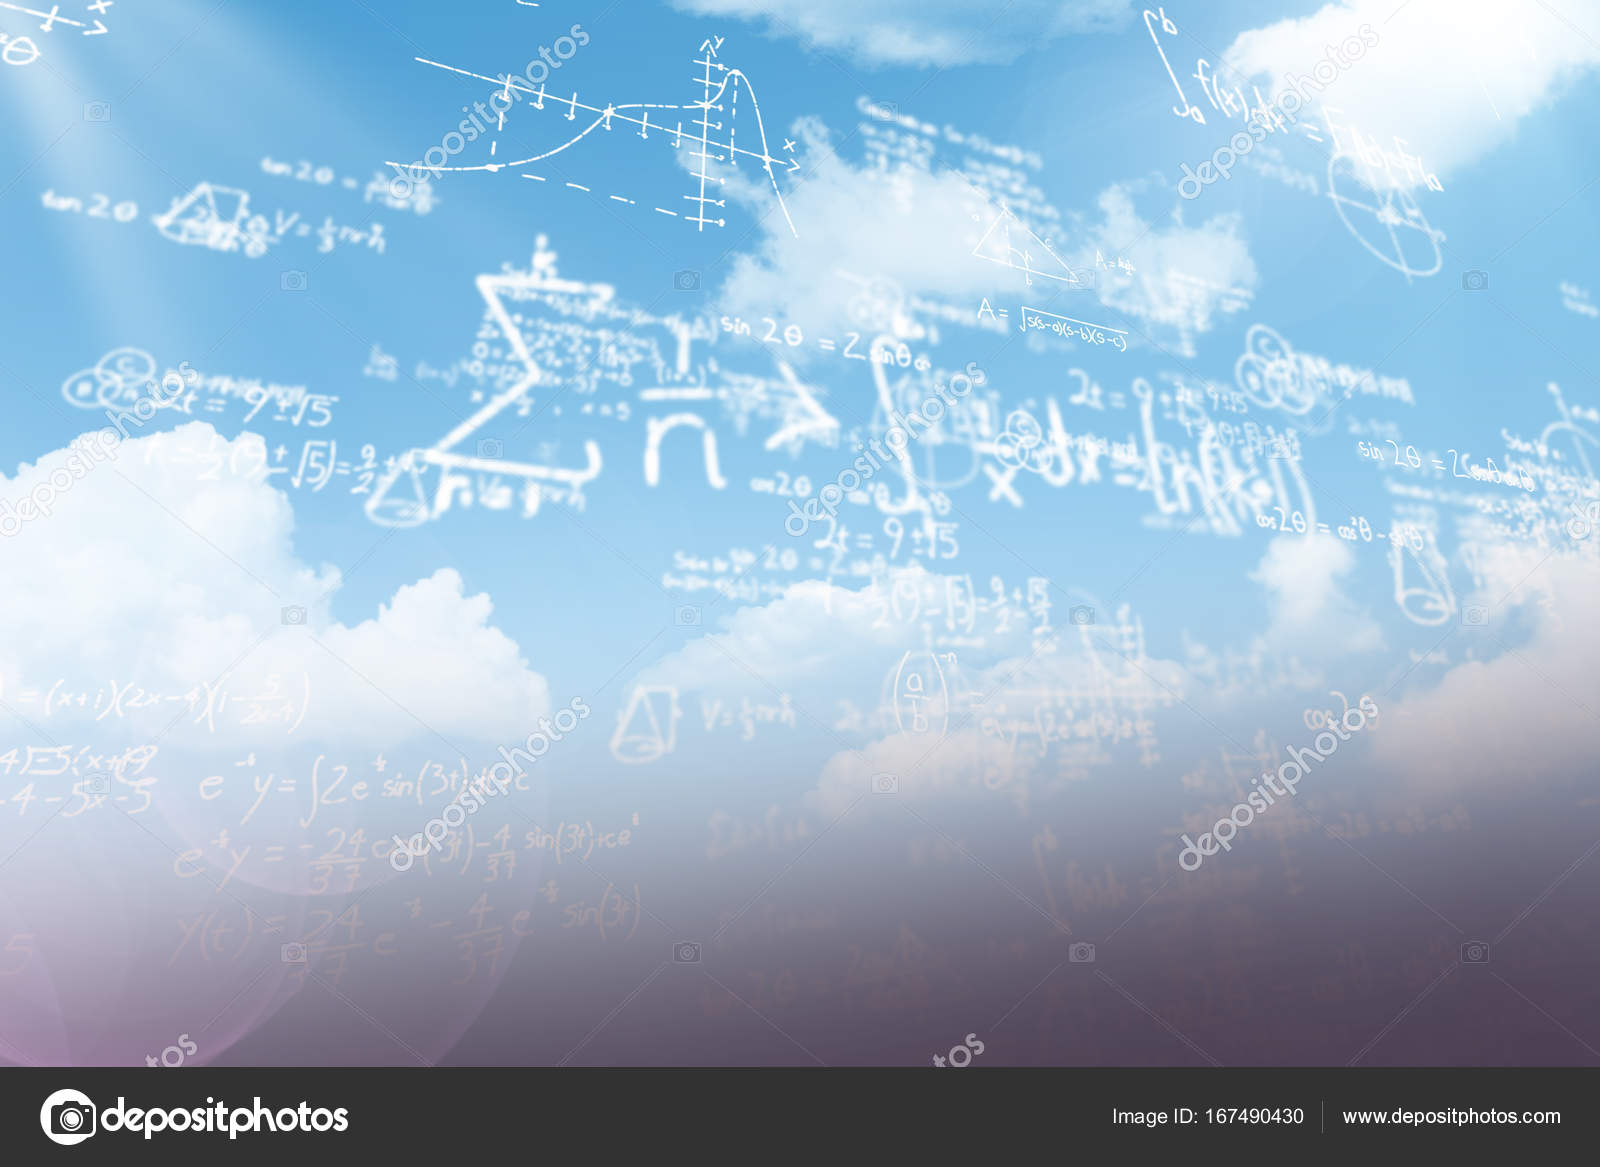 Maths graphic Stock Photos, Royalty Free Maths graphic Images |  Depositphotos